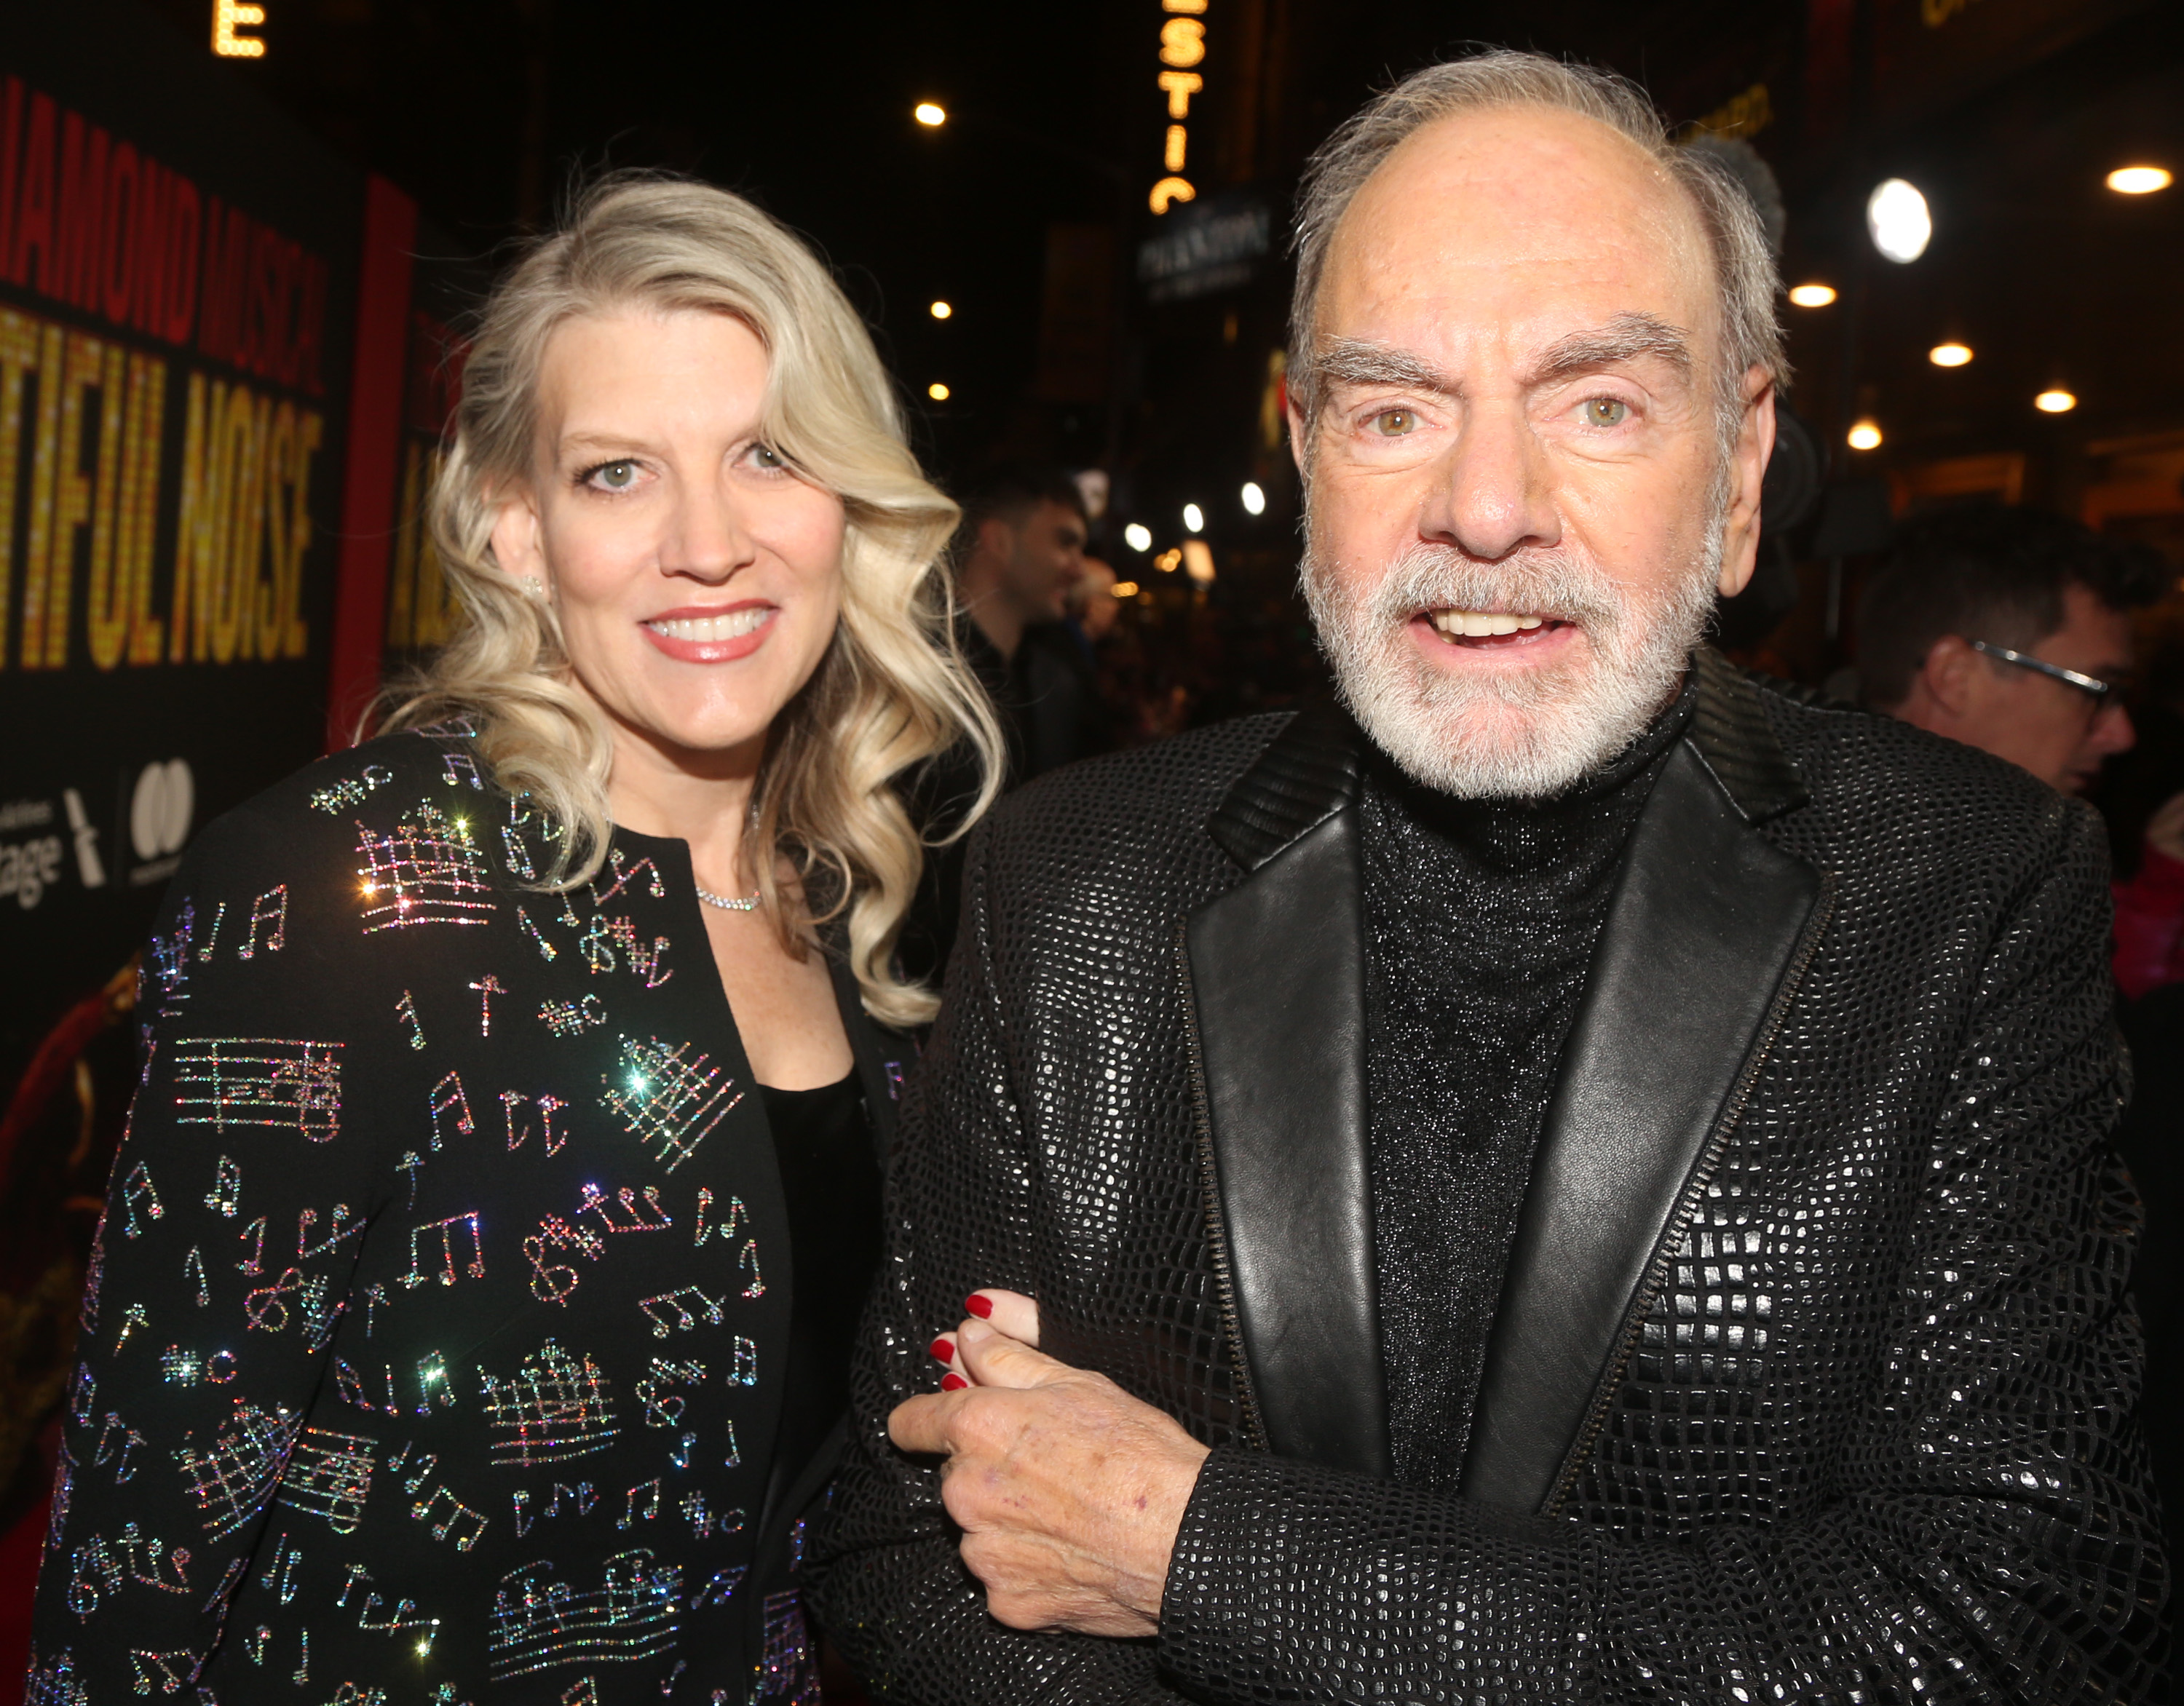 Katie McNeil and Neil Diamond at the opening night of the Broadway musical based on his life "A Beautiful Noise" in New York City, 2022 | Source: Getty Images